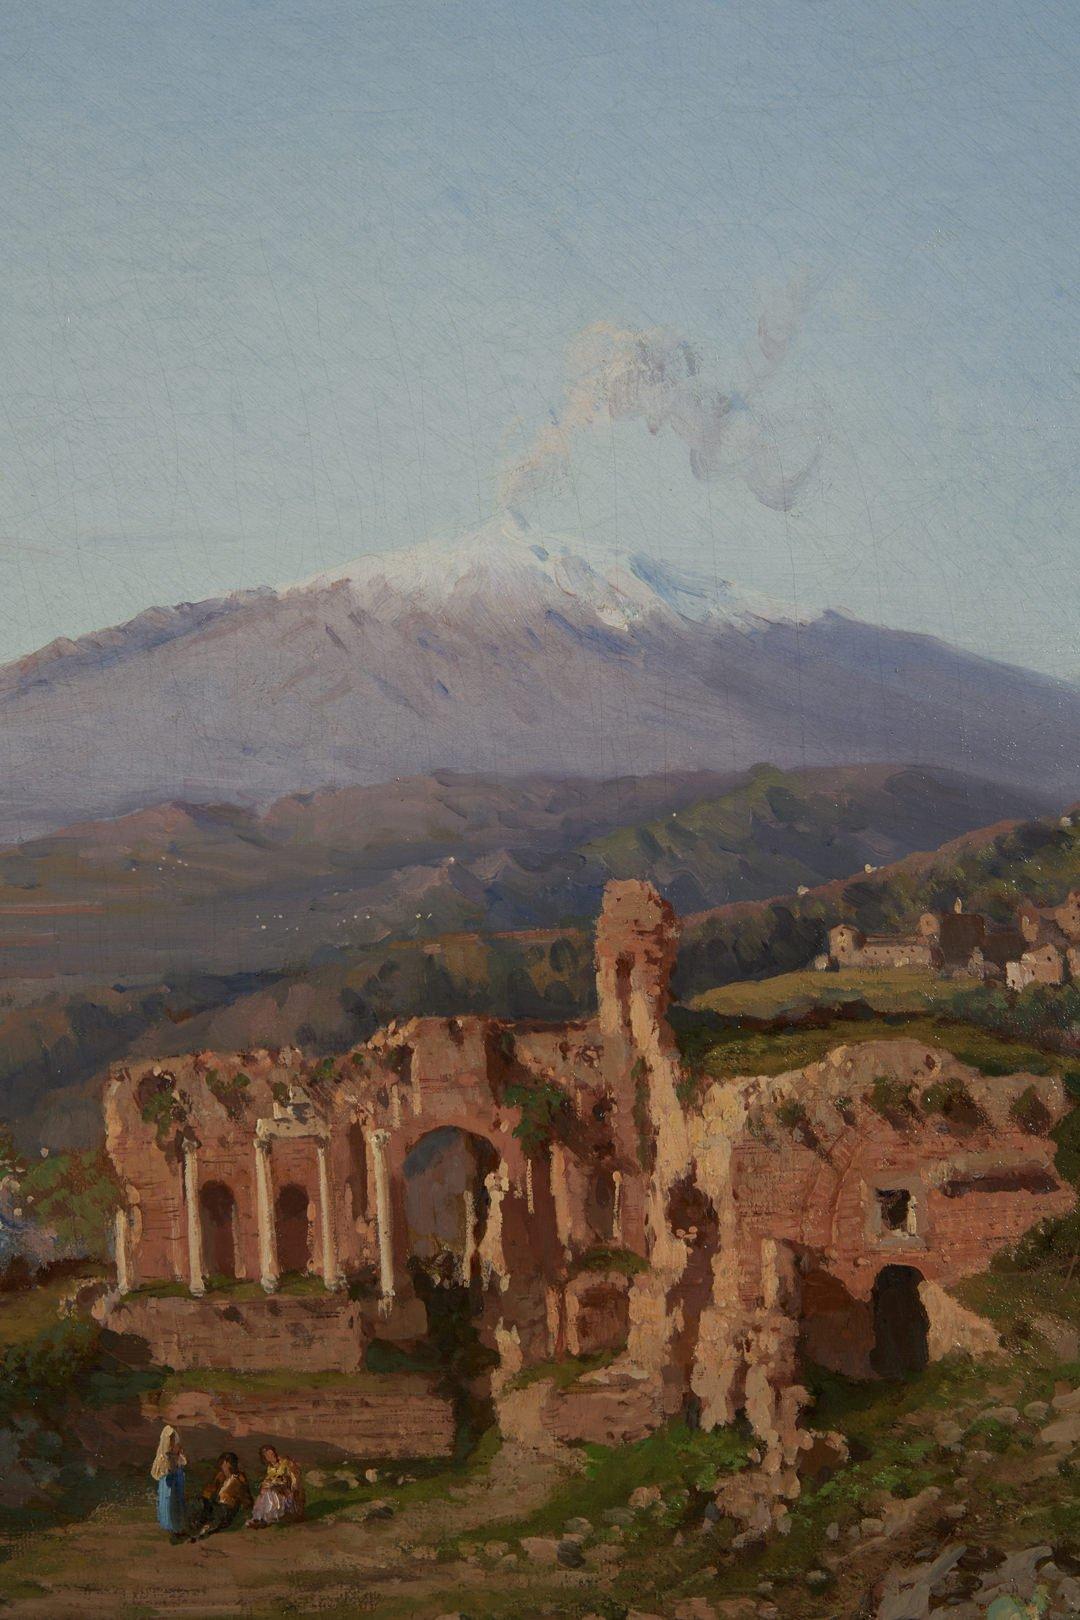 Alessandro La Volpe (Italian, 1820-1887)
View of Mt. Etna From the Ruins of the Theatre at Taormina, 1883
Oil on canvas
Signed and dated lower right
29.5 x 52.5 inches
39 x 62 inches, framed

Alessandro La Volpe was a 19th century Italian landscape